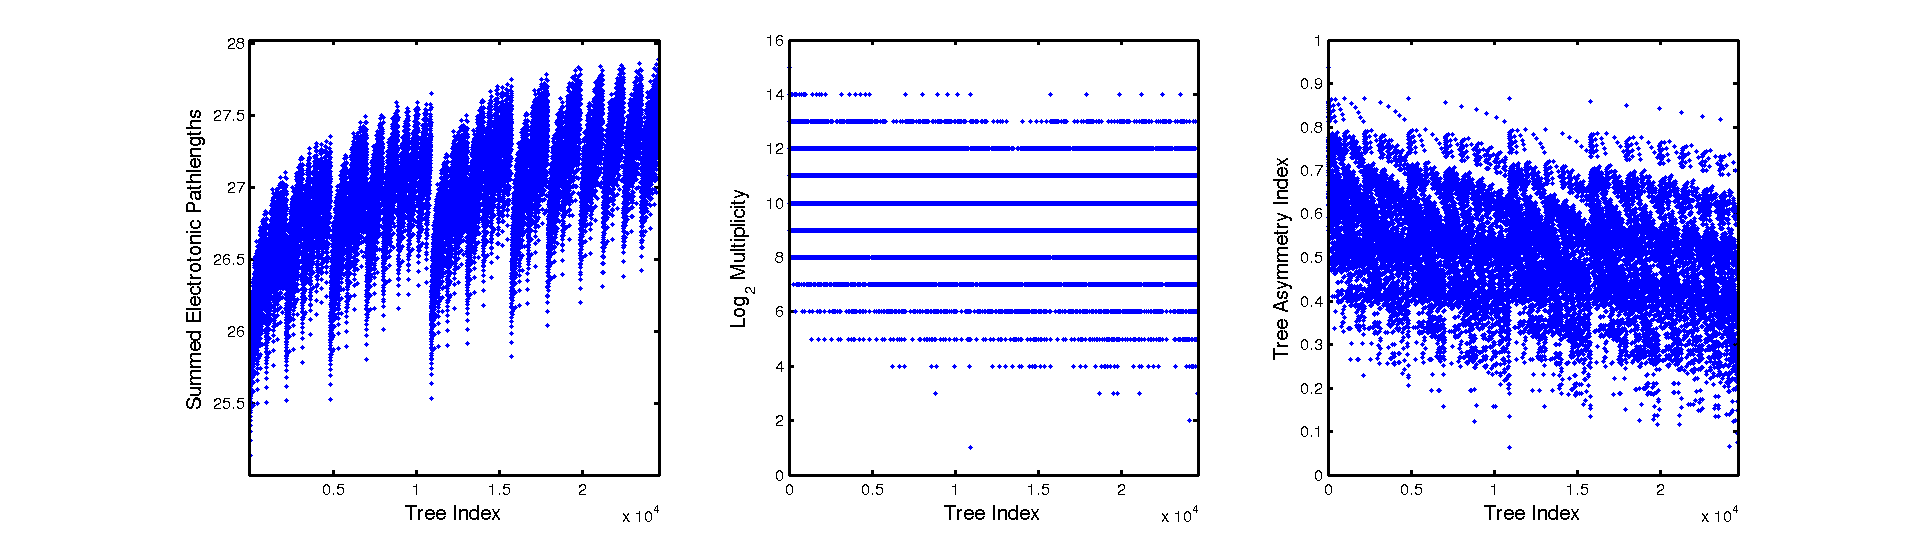 Comparison of  different tree asymmetry measures with tree index for N=17